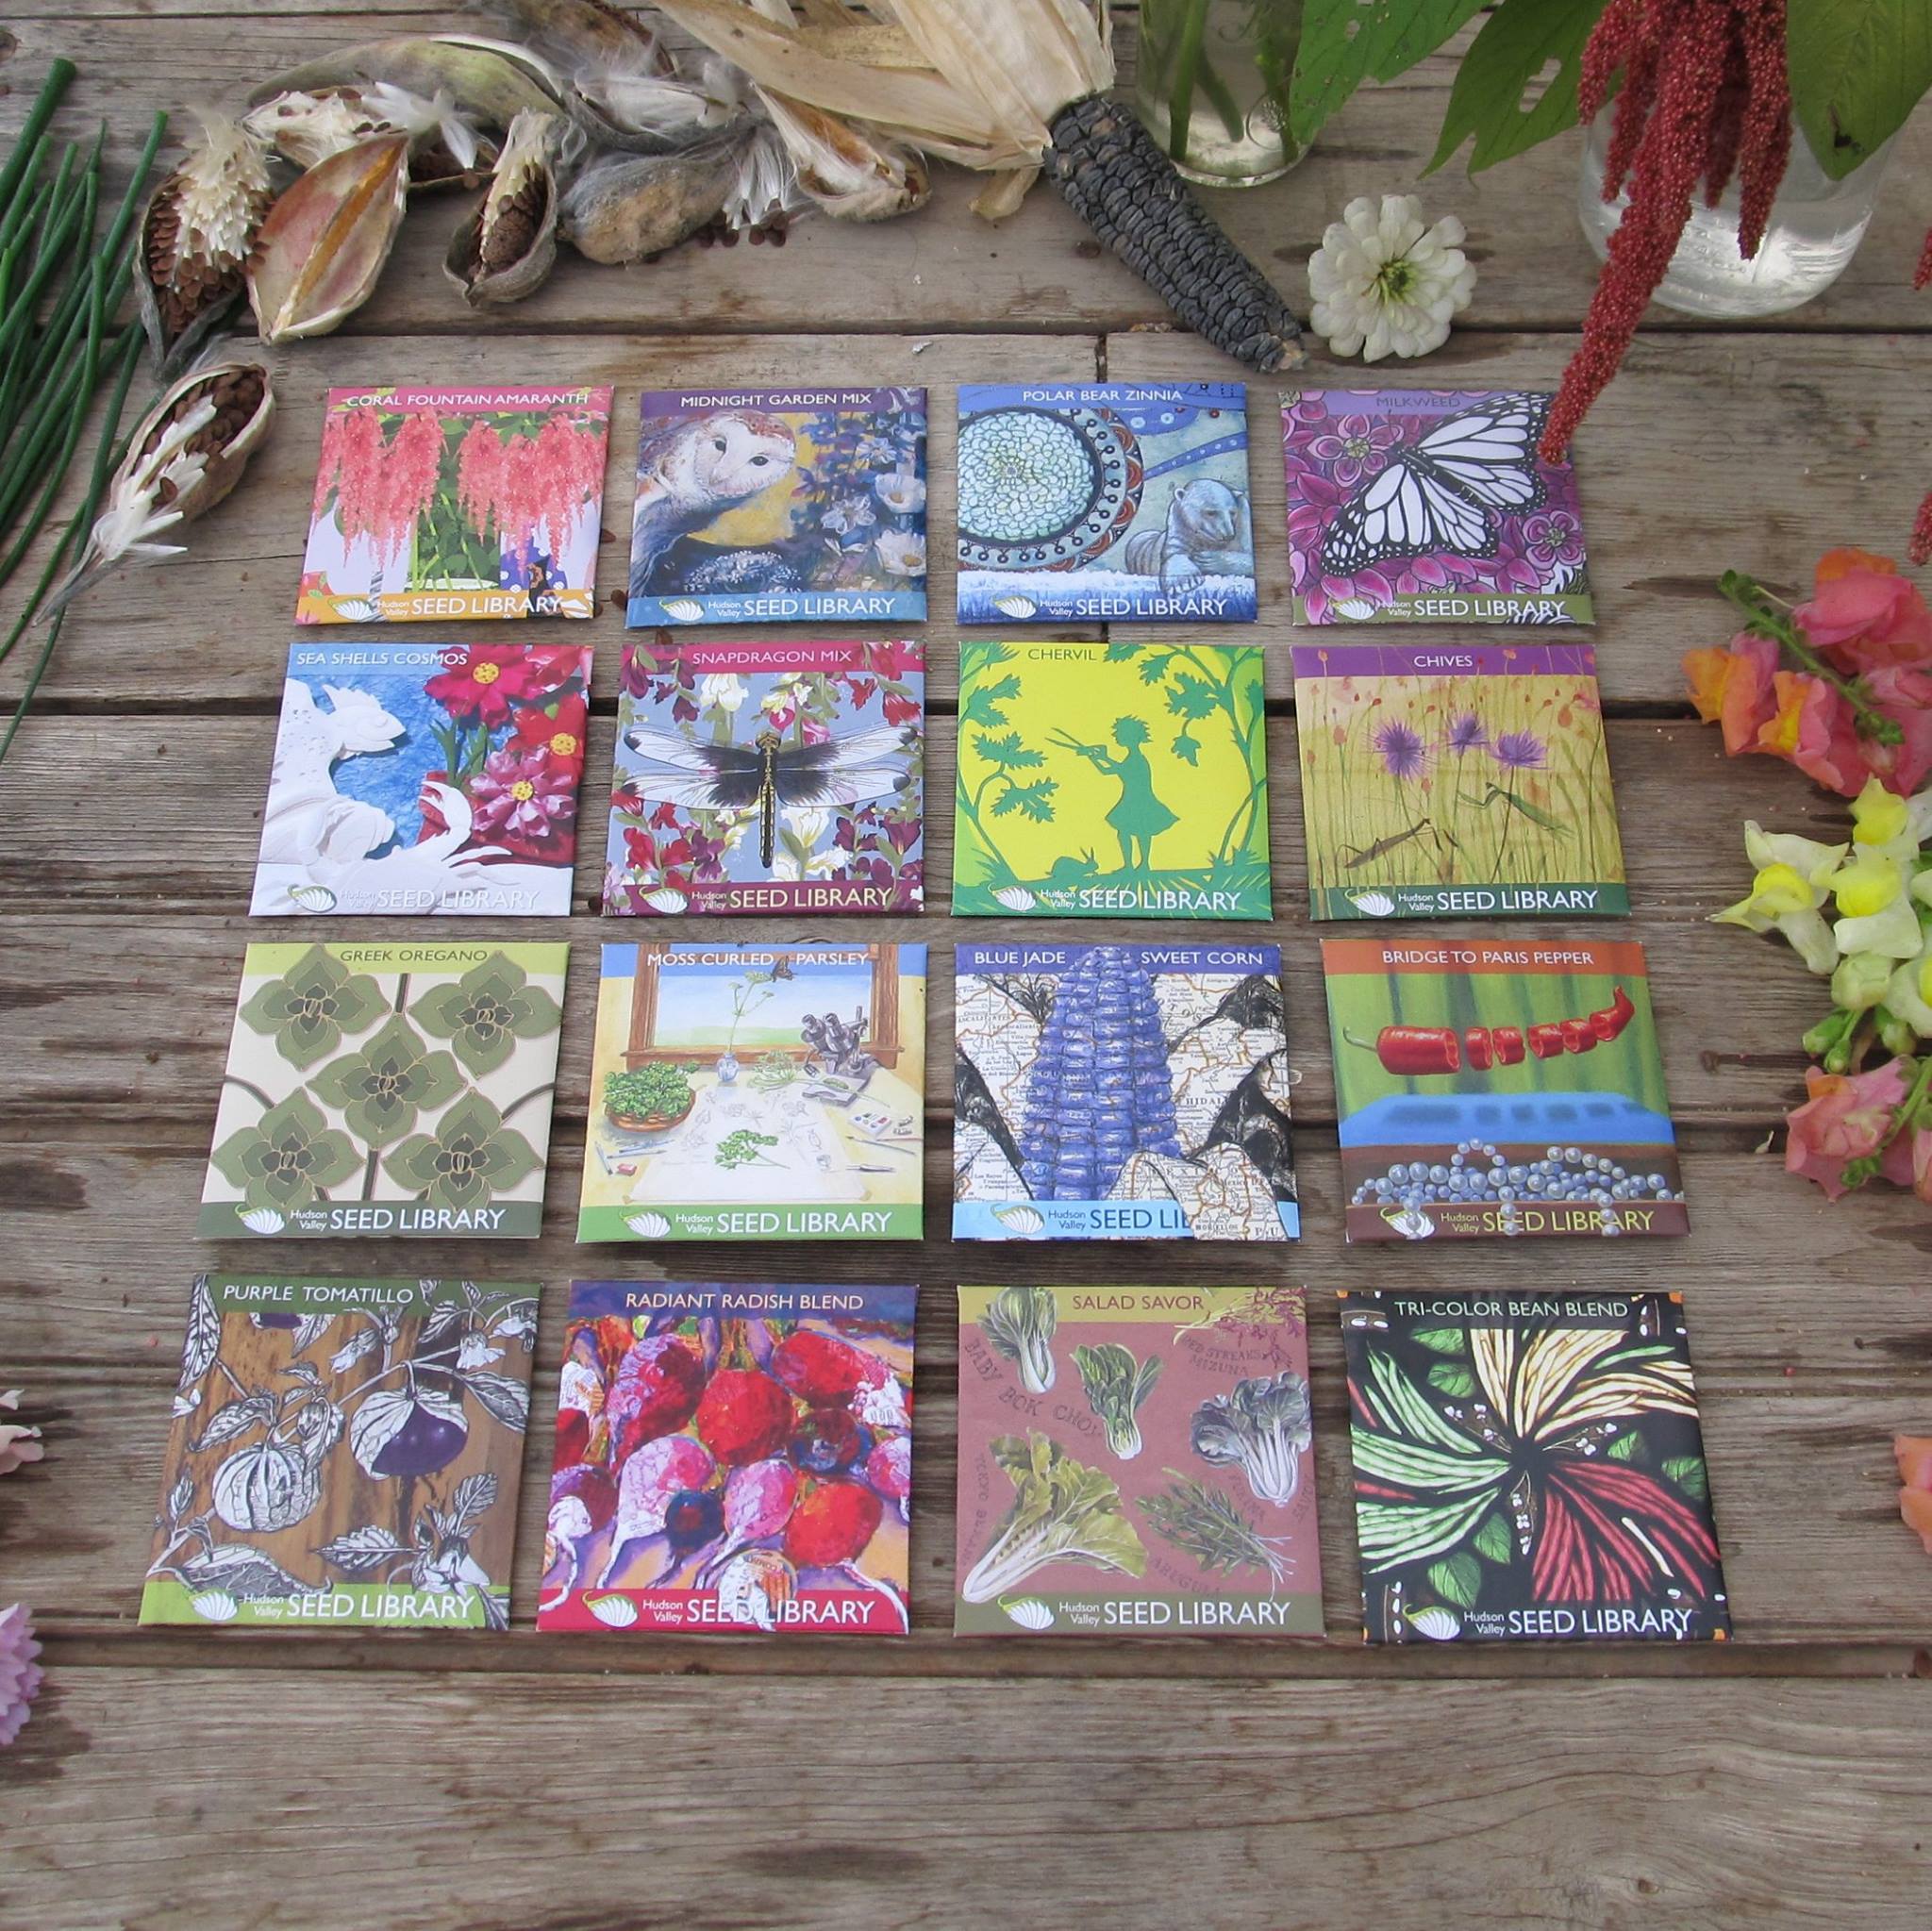  An artfully crafted selection of seeds from the Seed Library 